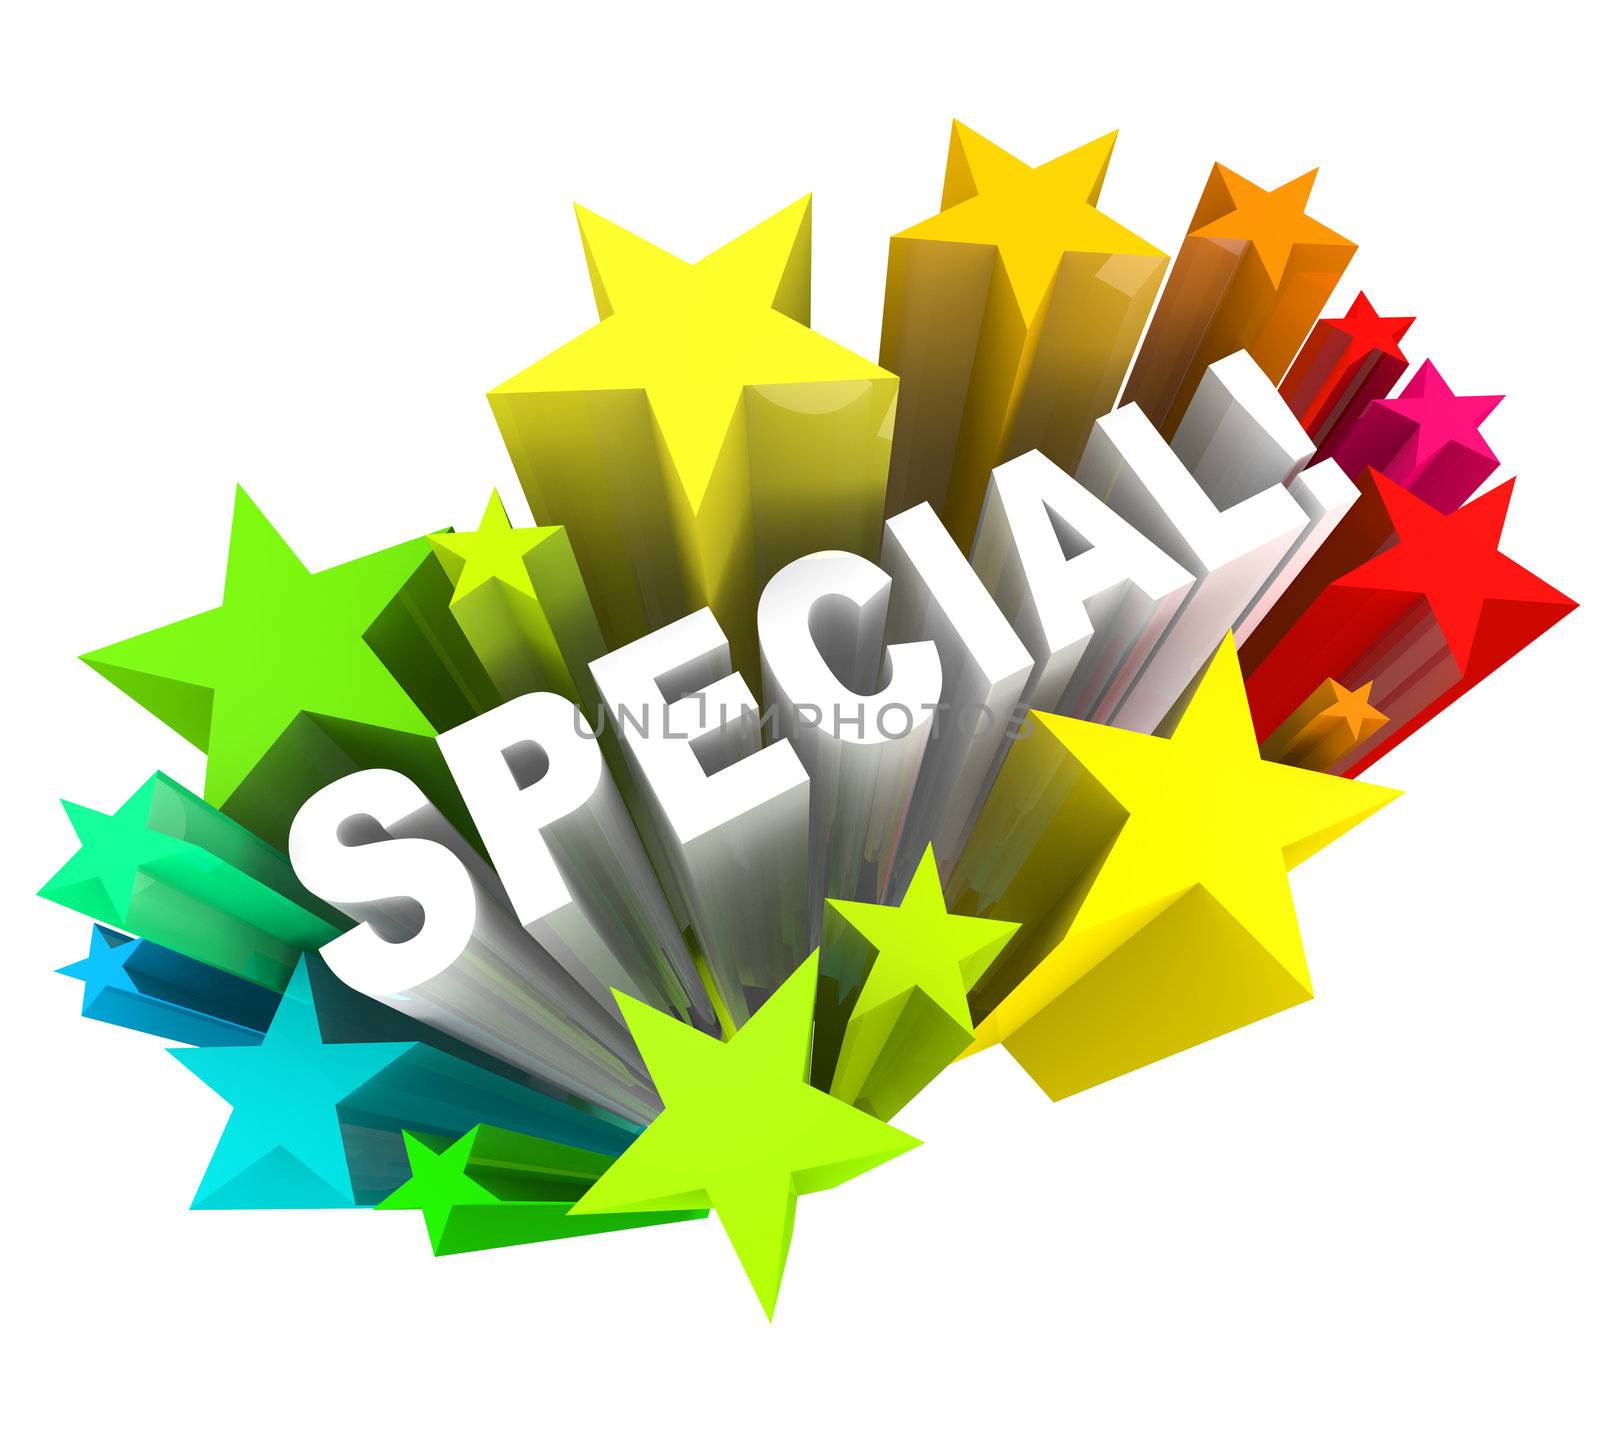 The word Special in a burst of stars representing a discount sale or praise or compliment for a person with different or unique qualities